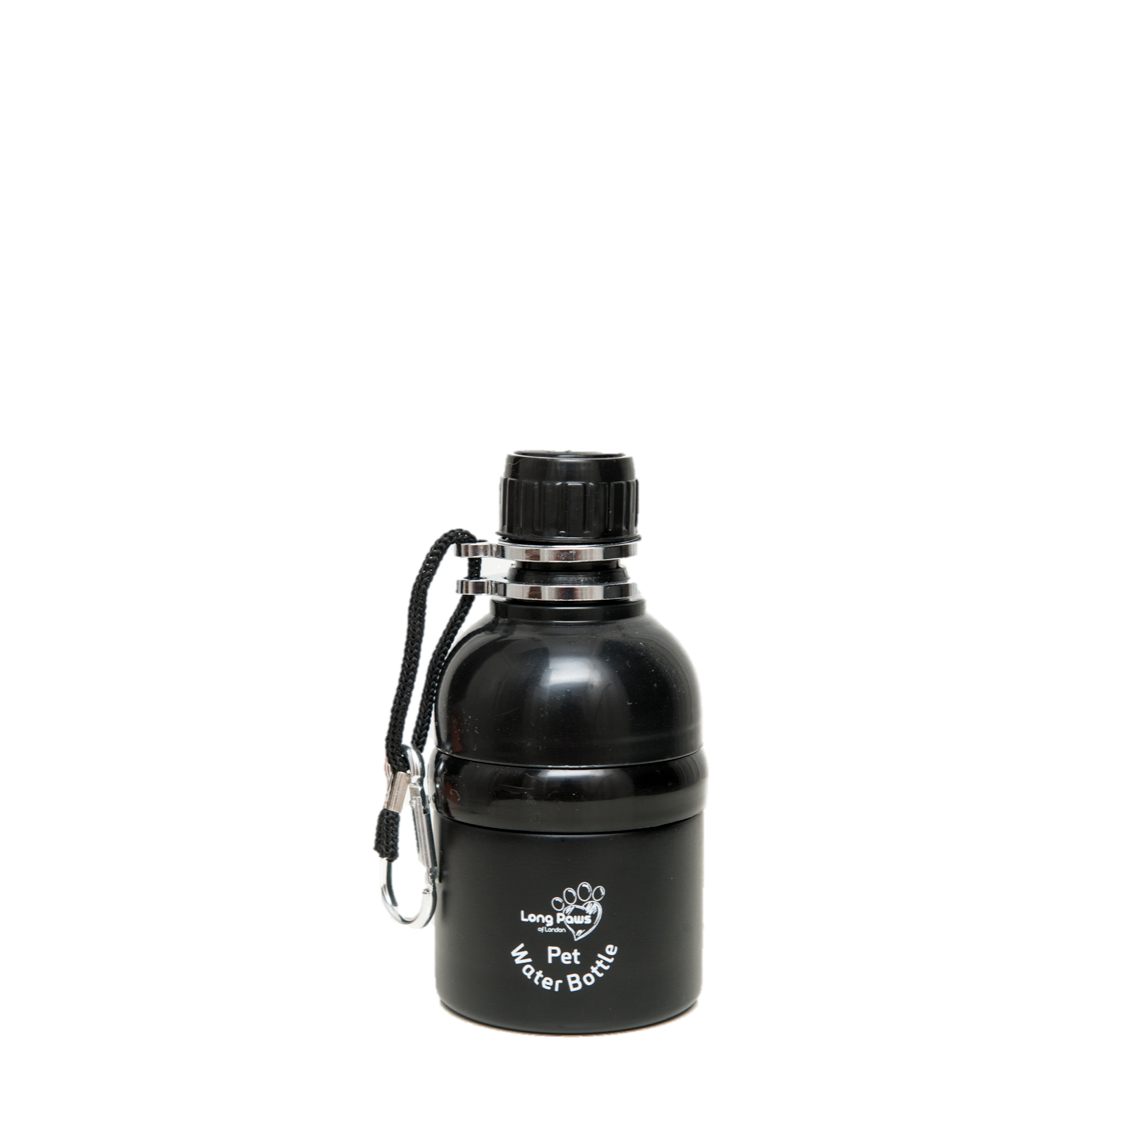 Pet Water Bottle - Black. - Fernie's Choice Classic Country Wear for Dogs